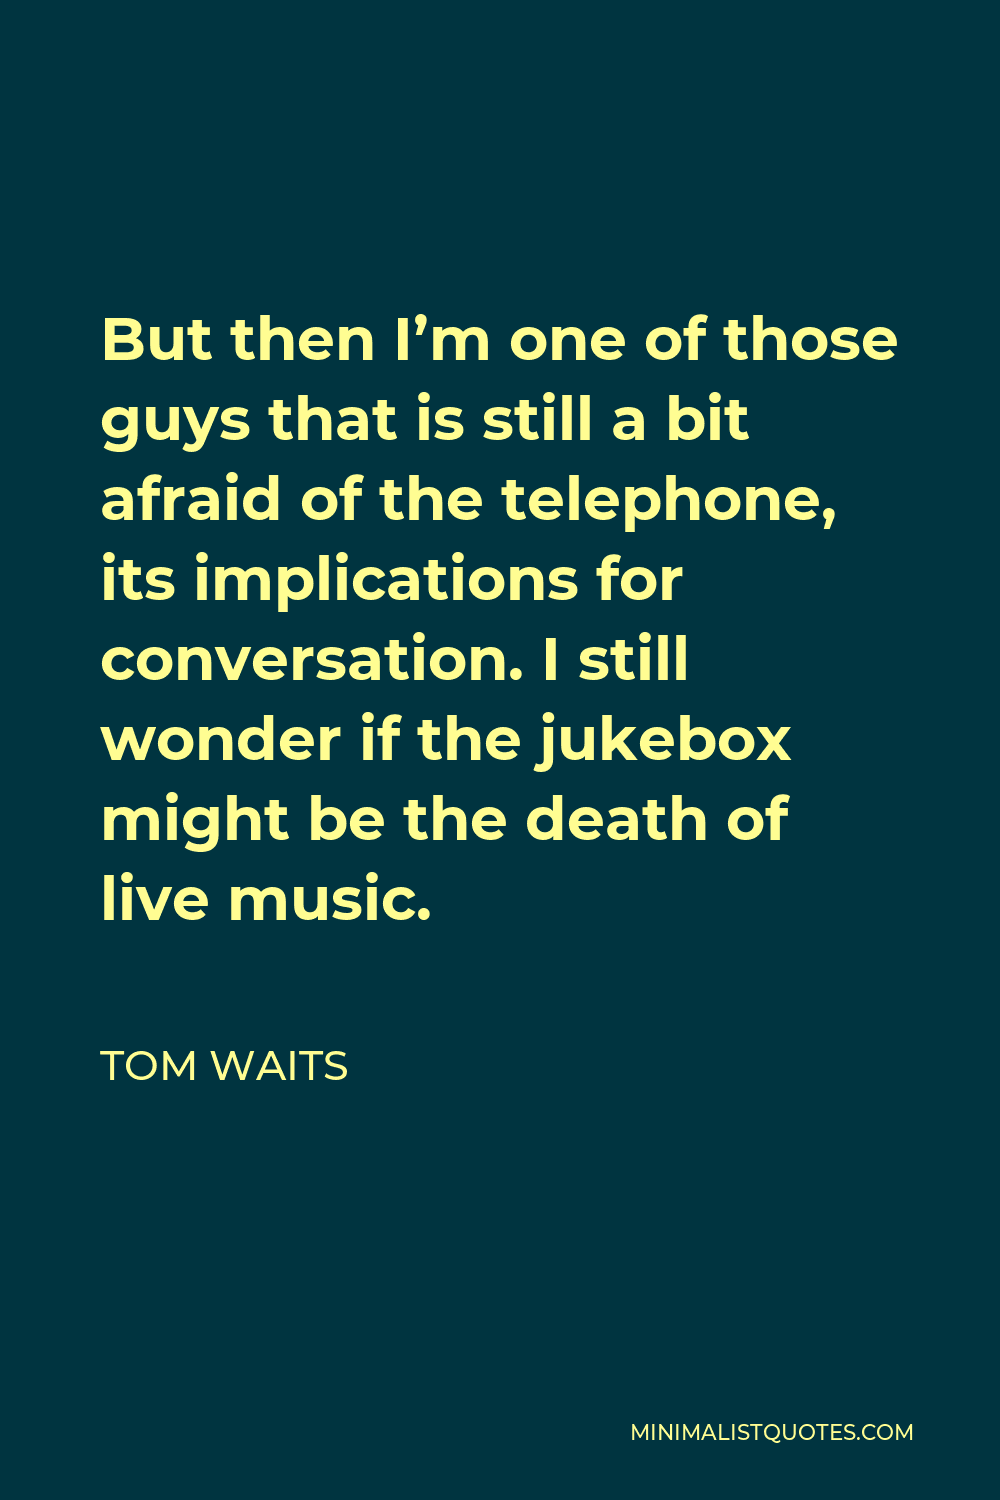 Tom Waits Quote - But then I’m one of those guys that is still a bit afraid of the telephone, its implications for conversation. I still wonder if the jukebox might be the death of live music.